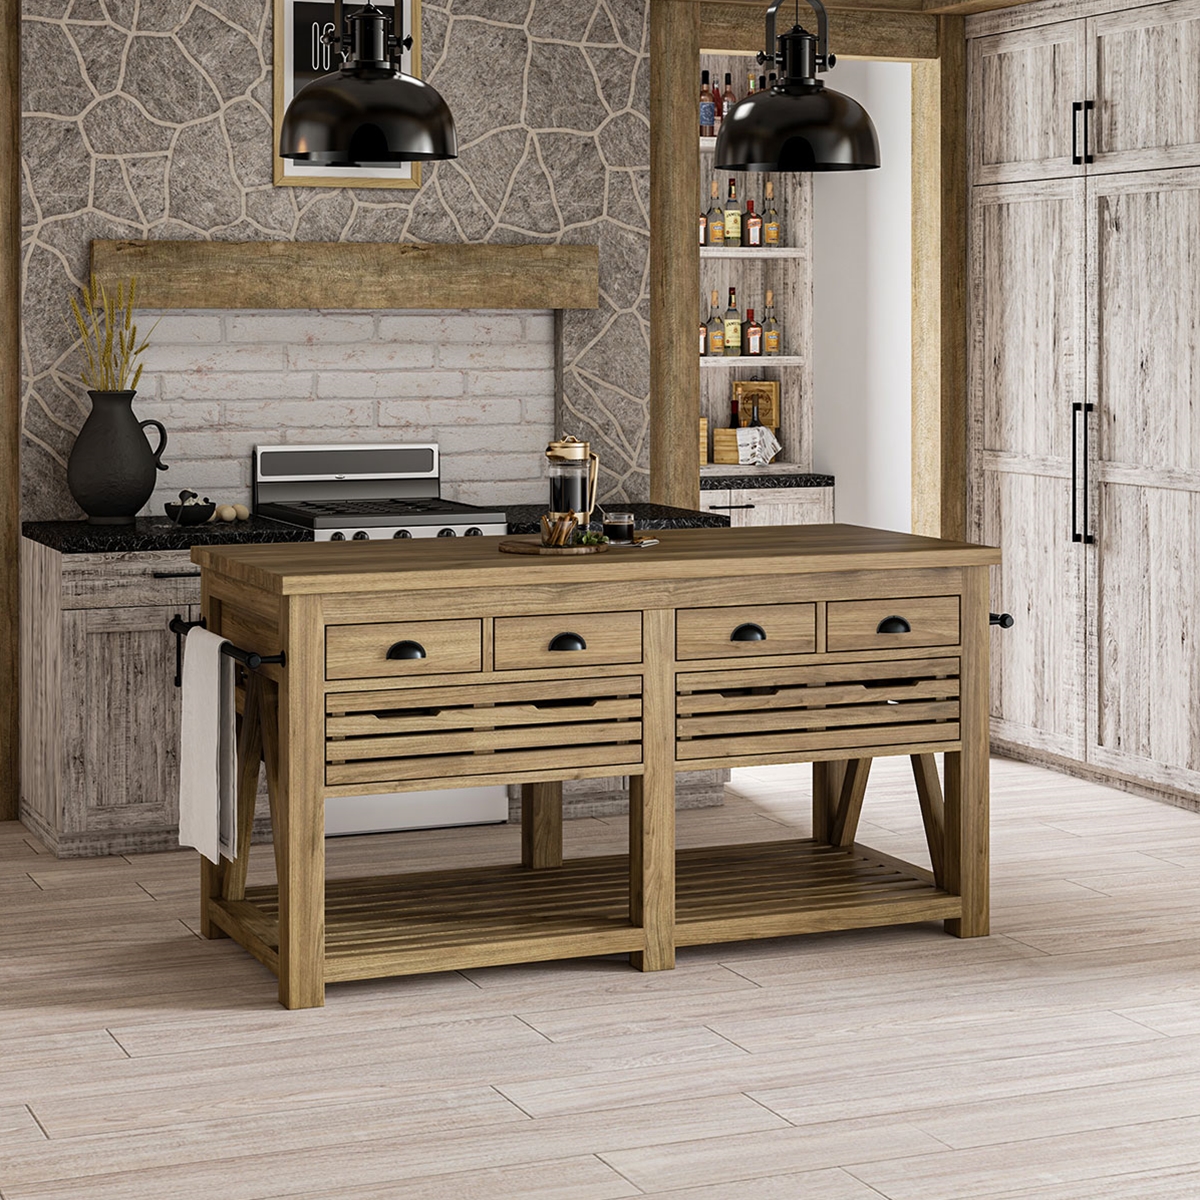 https://www.sierralivingconcepts.com/images/thumbs/0409245_calderdale-rustic-teak-wood-kitchen-island-with-drawers.jpeg